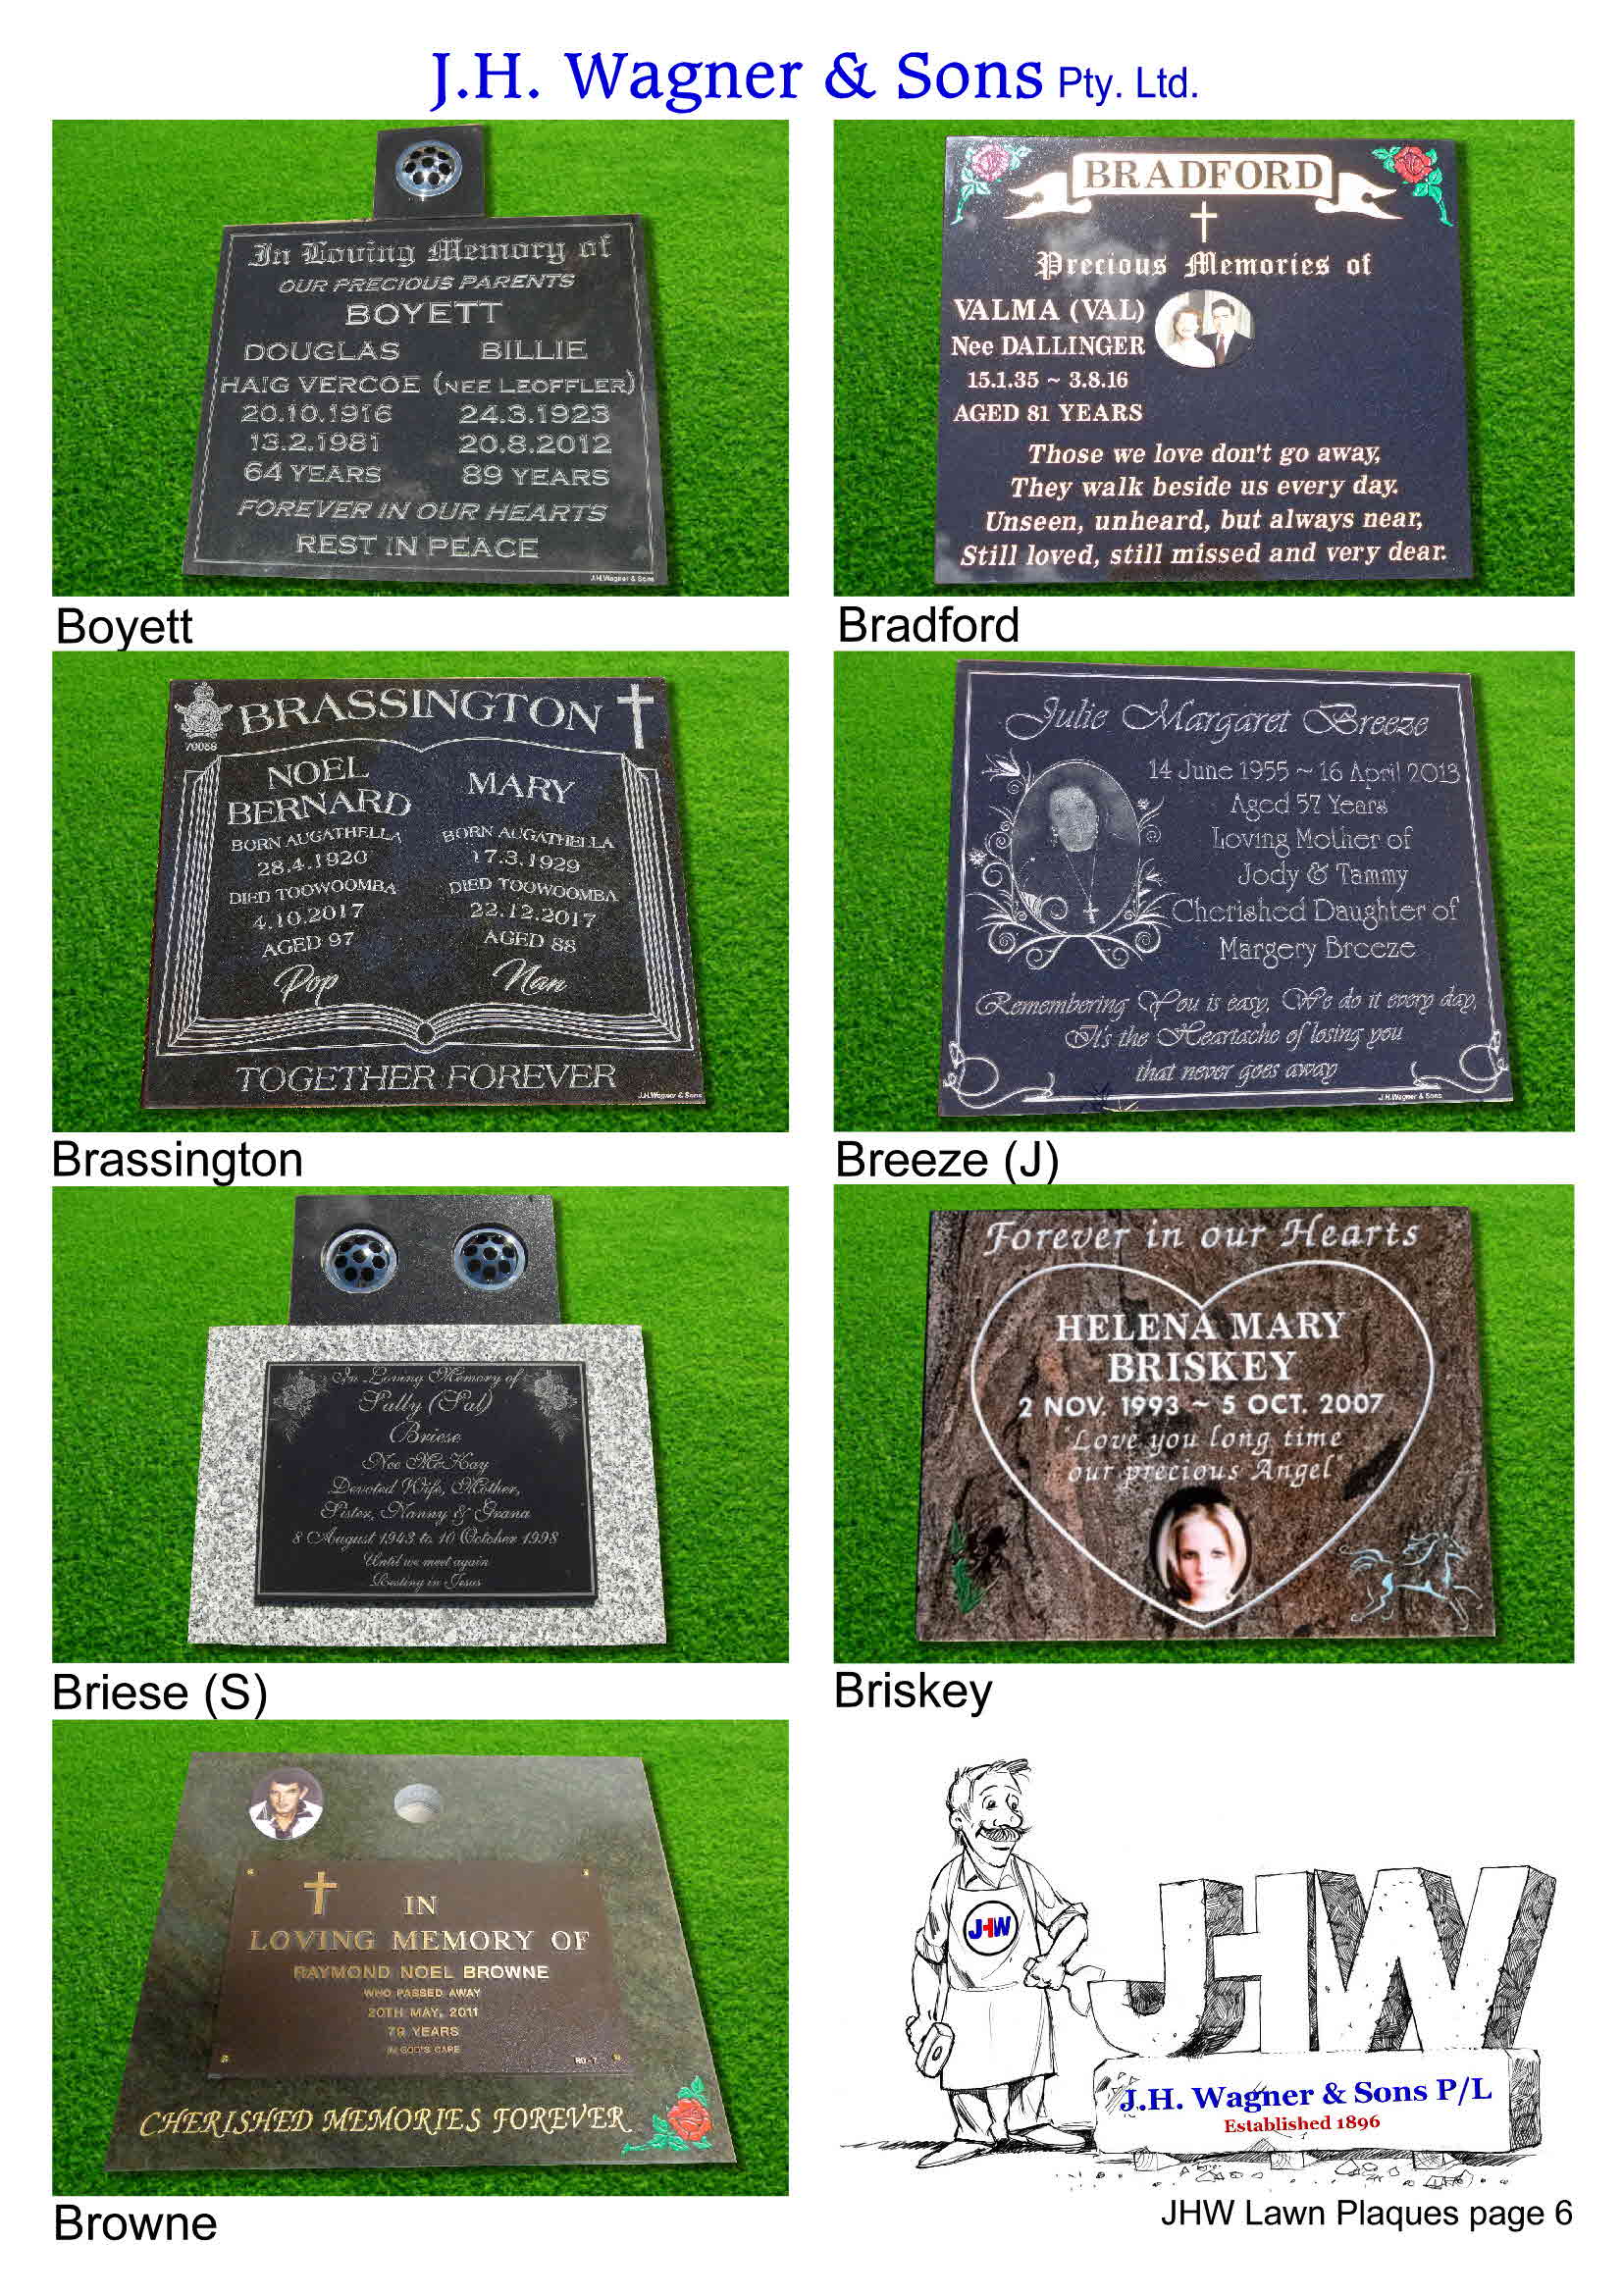 Lawn plaques by J.H. Wagner & Sons. Page 6